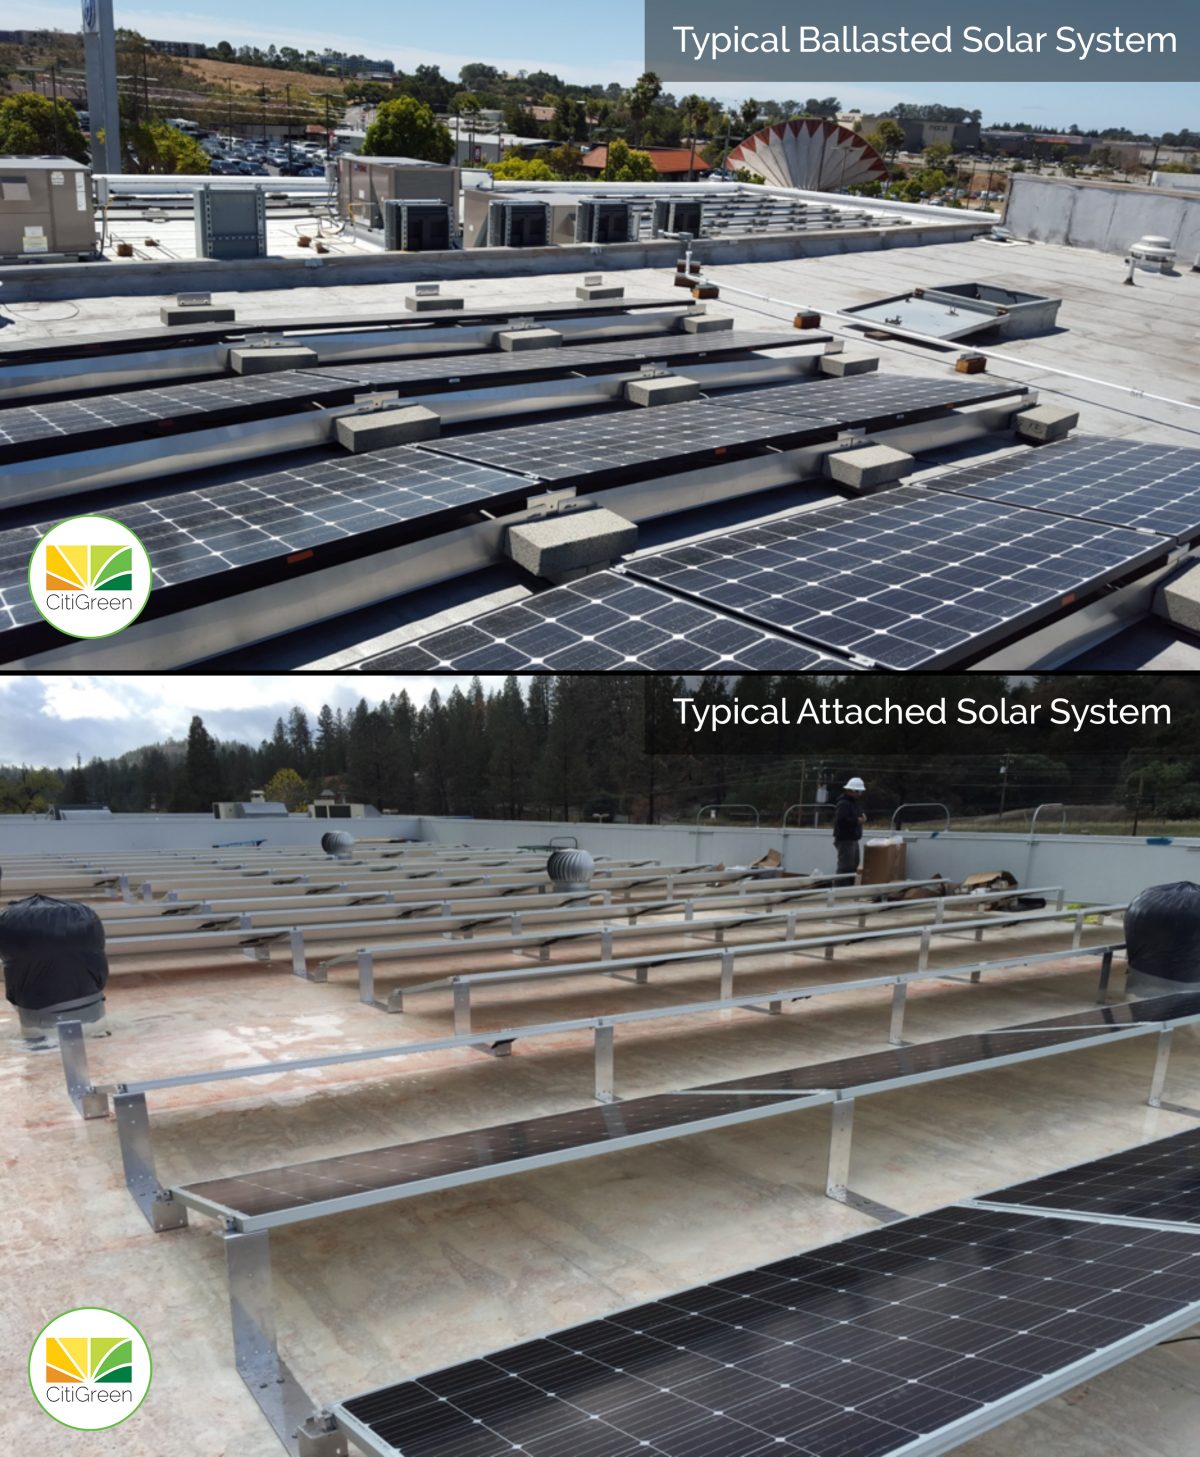 Should I Choose an Attached Solar System or a Ballasted System?